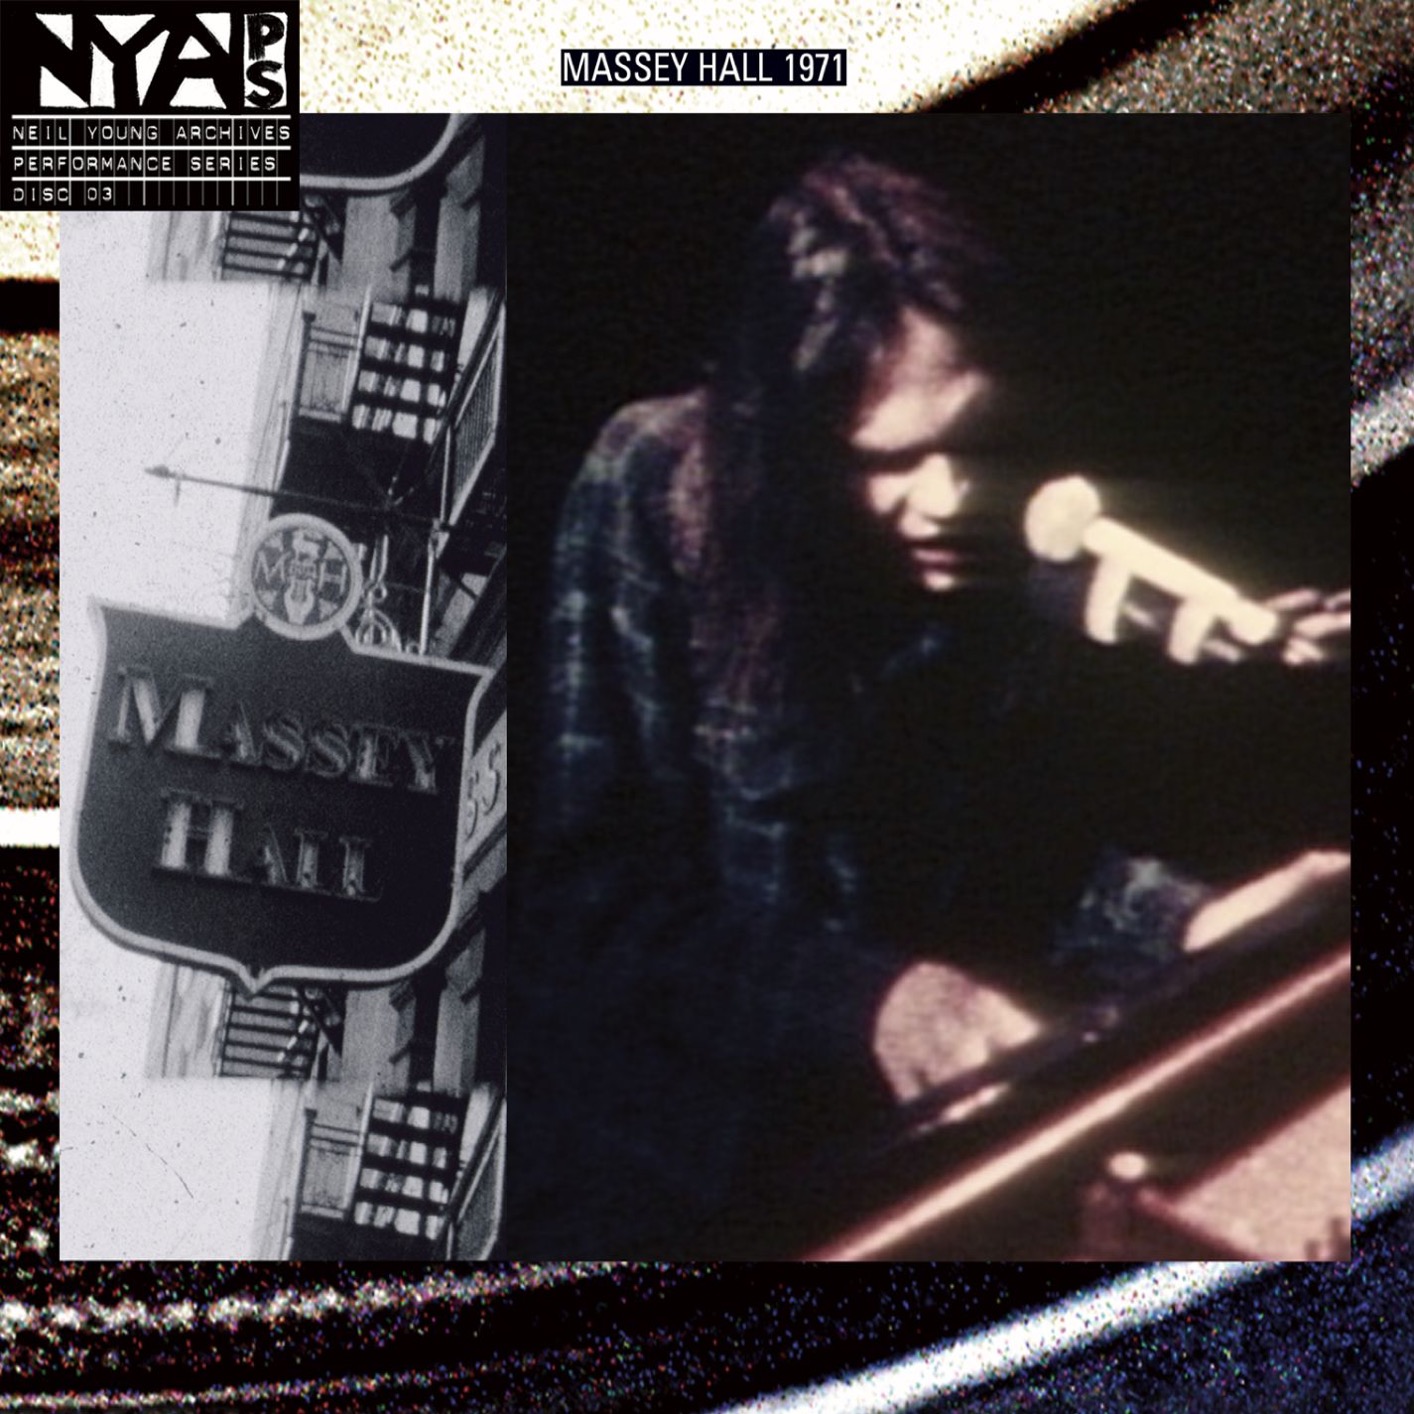 Neil Young - Live at Massey Hall 1971 (2007/2019) [FLAC 24bit/96kHz]